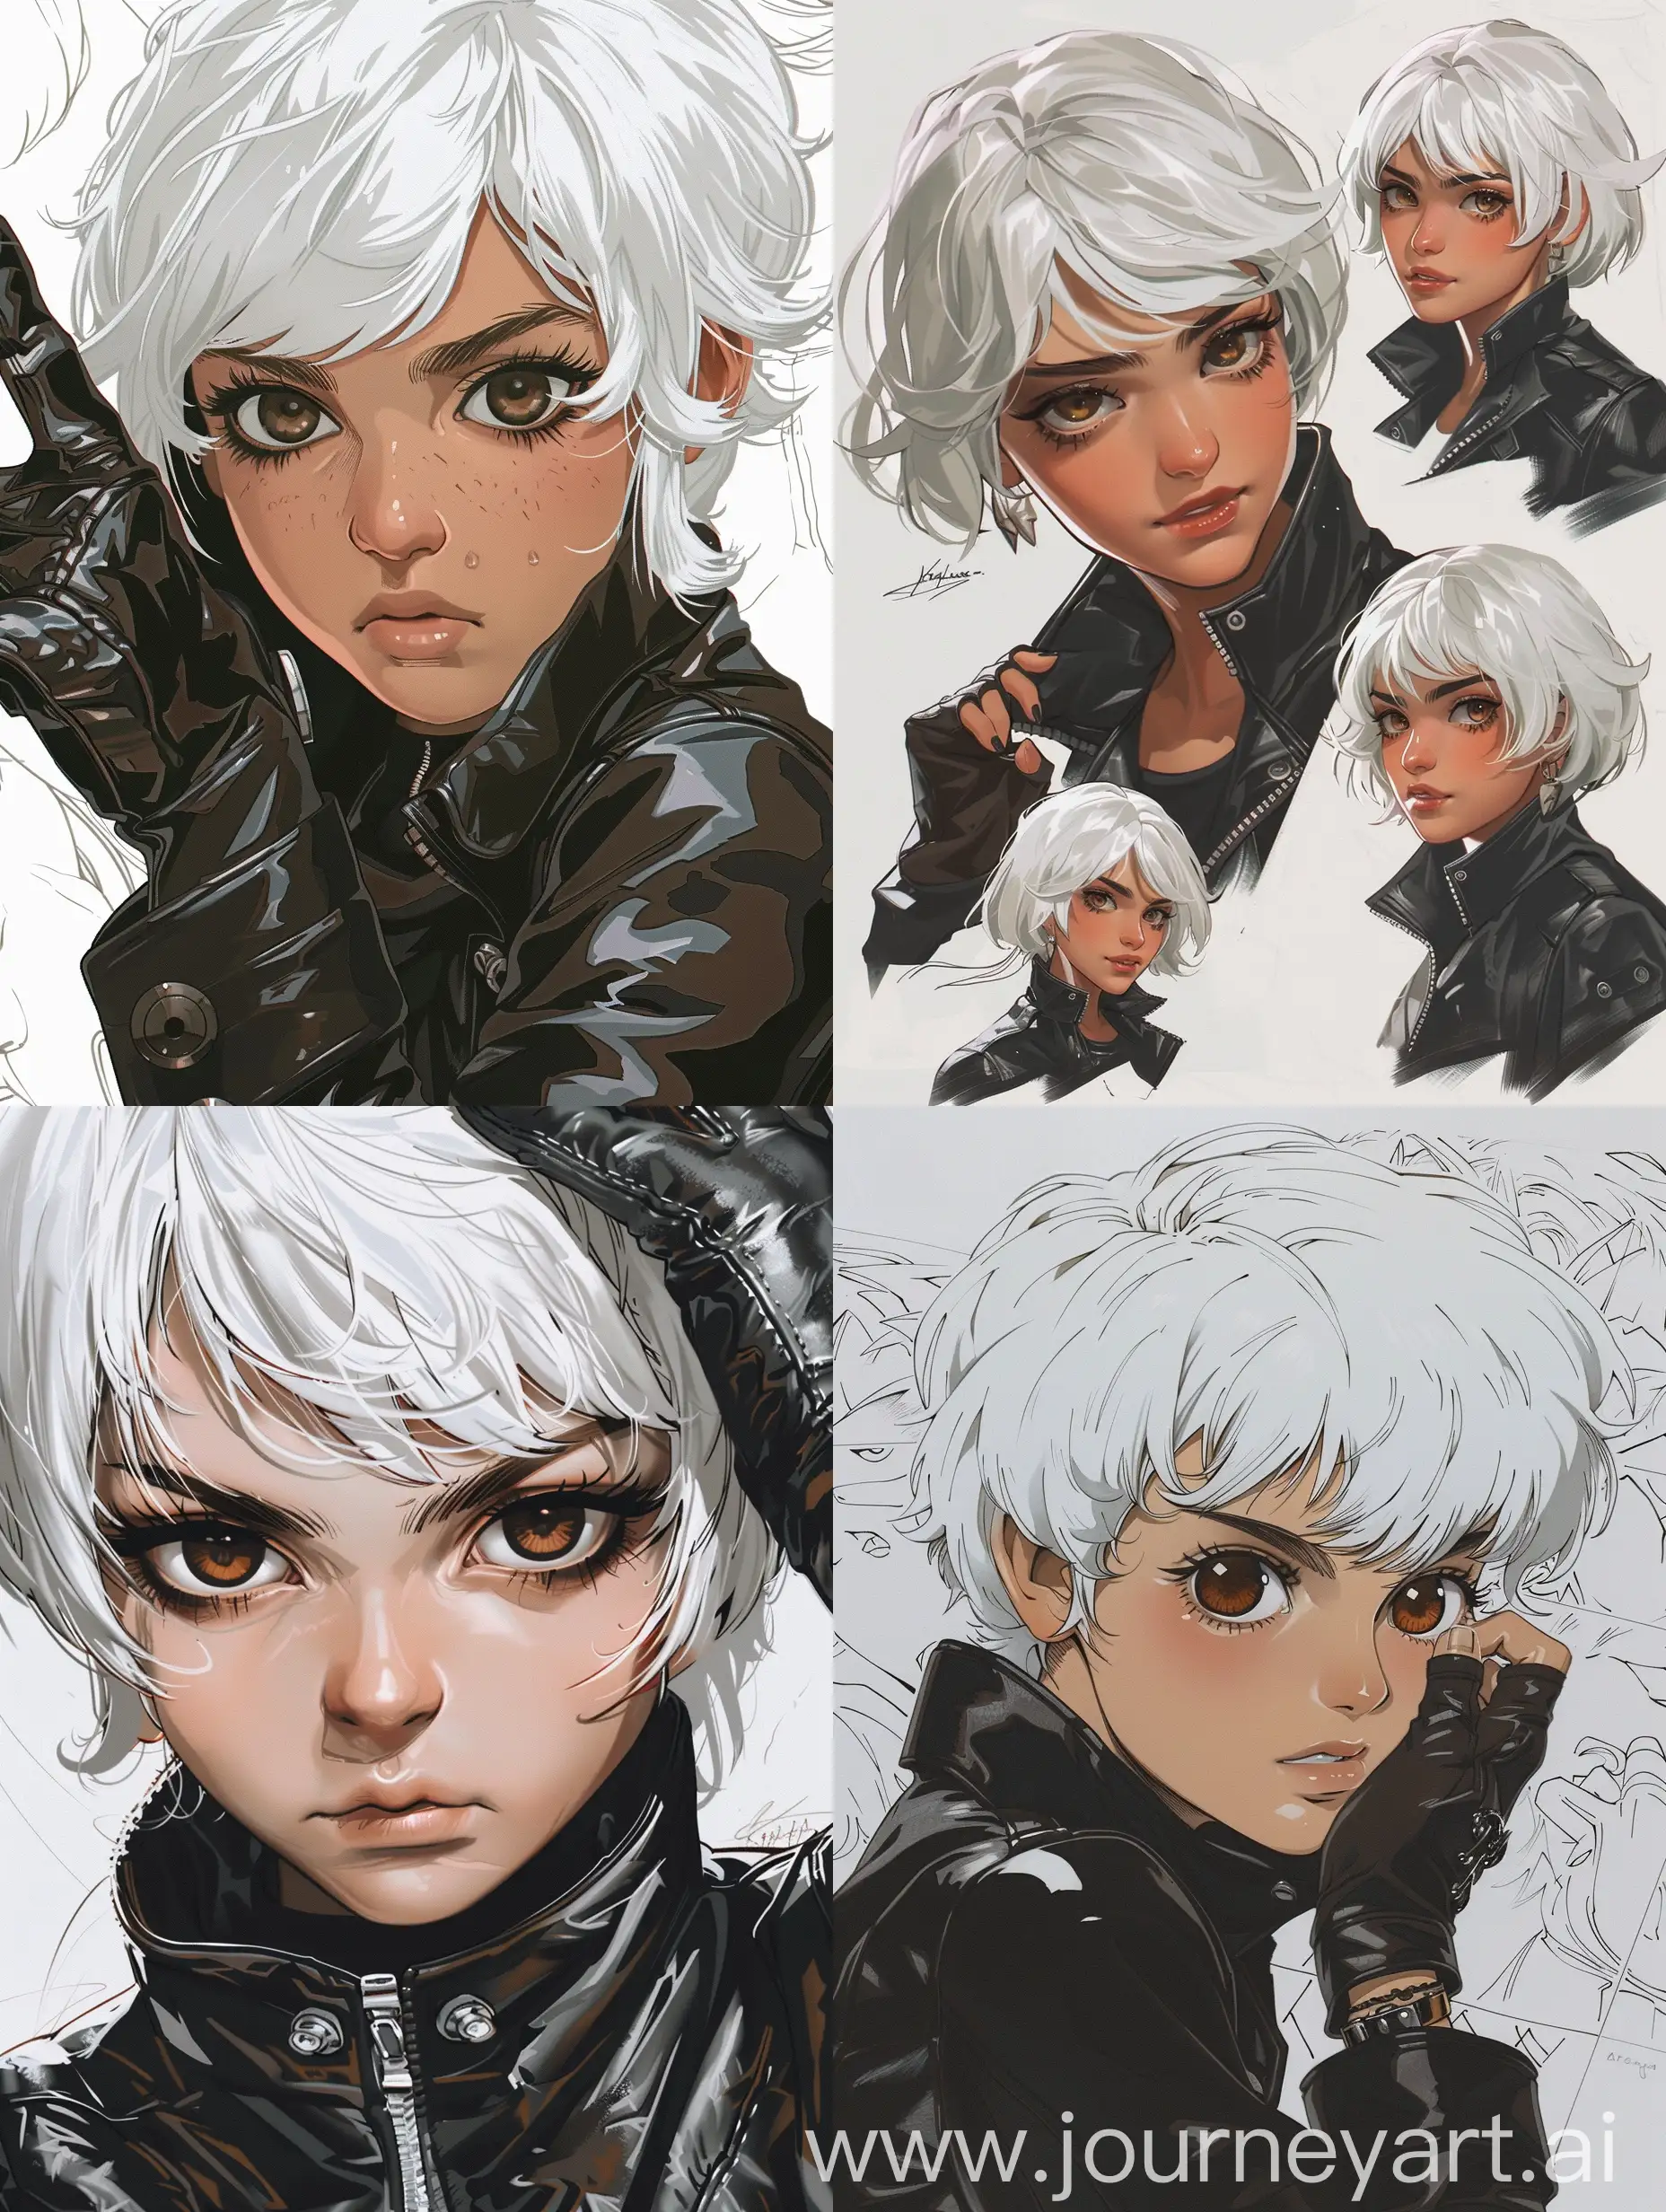 Badass-Anime-Woman-with-Fluffy-White-Hair-in-Retro-Street-Style